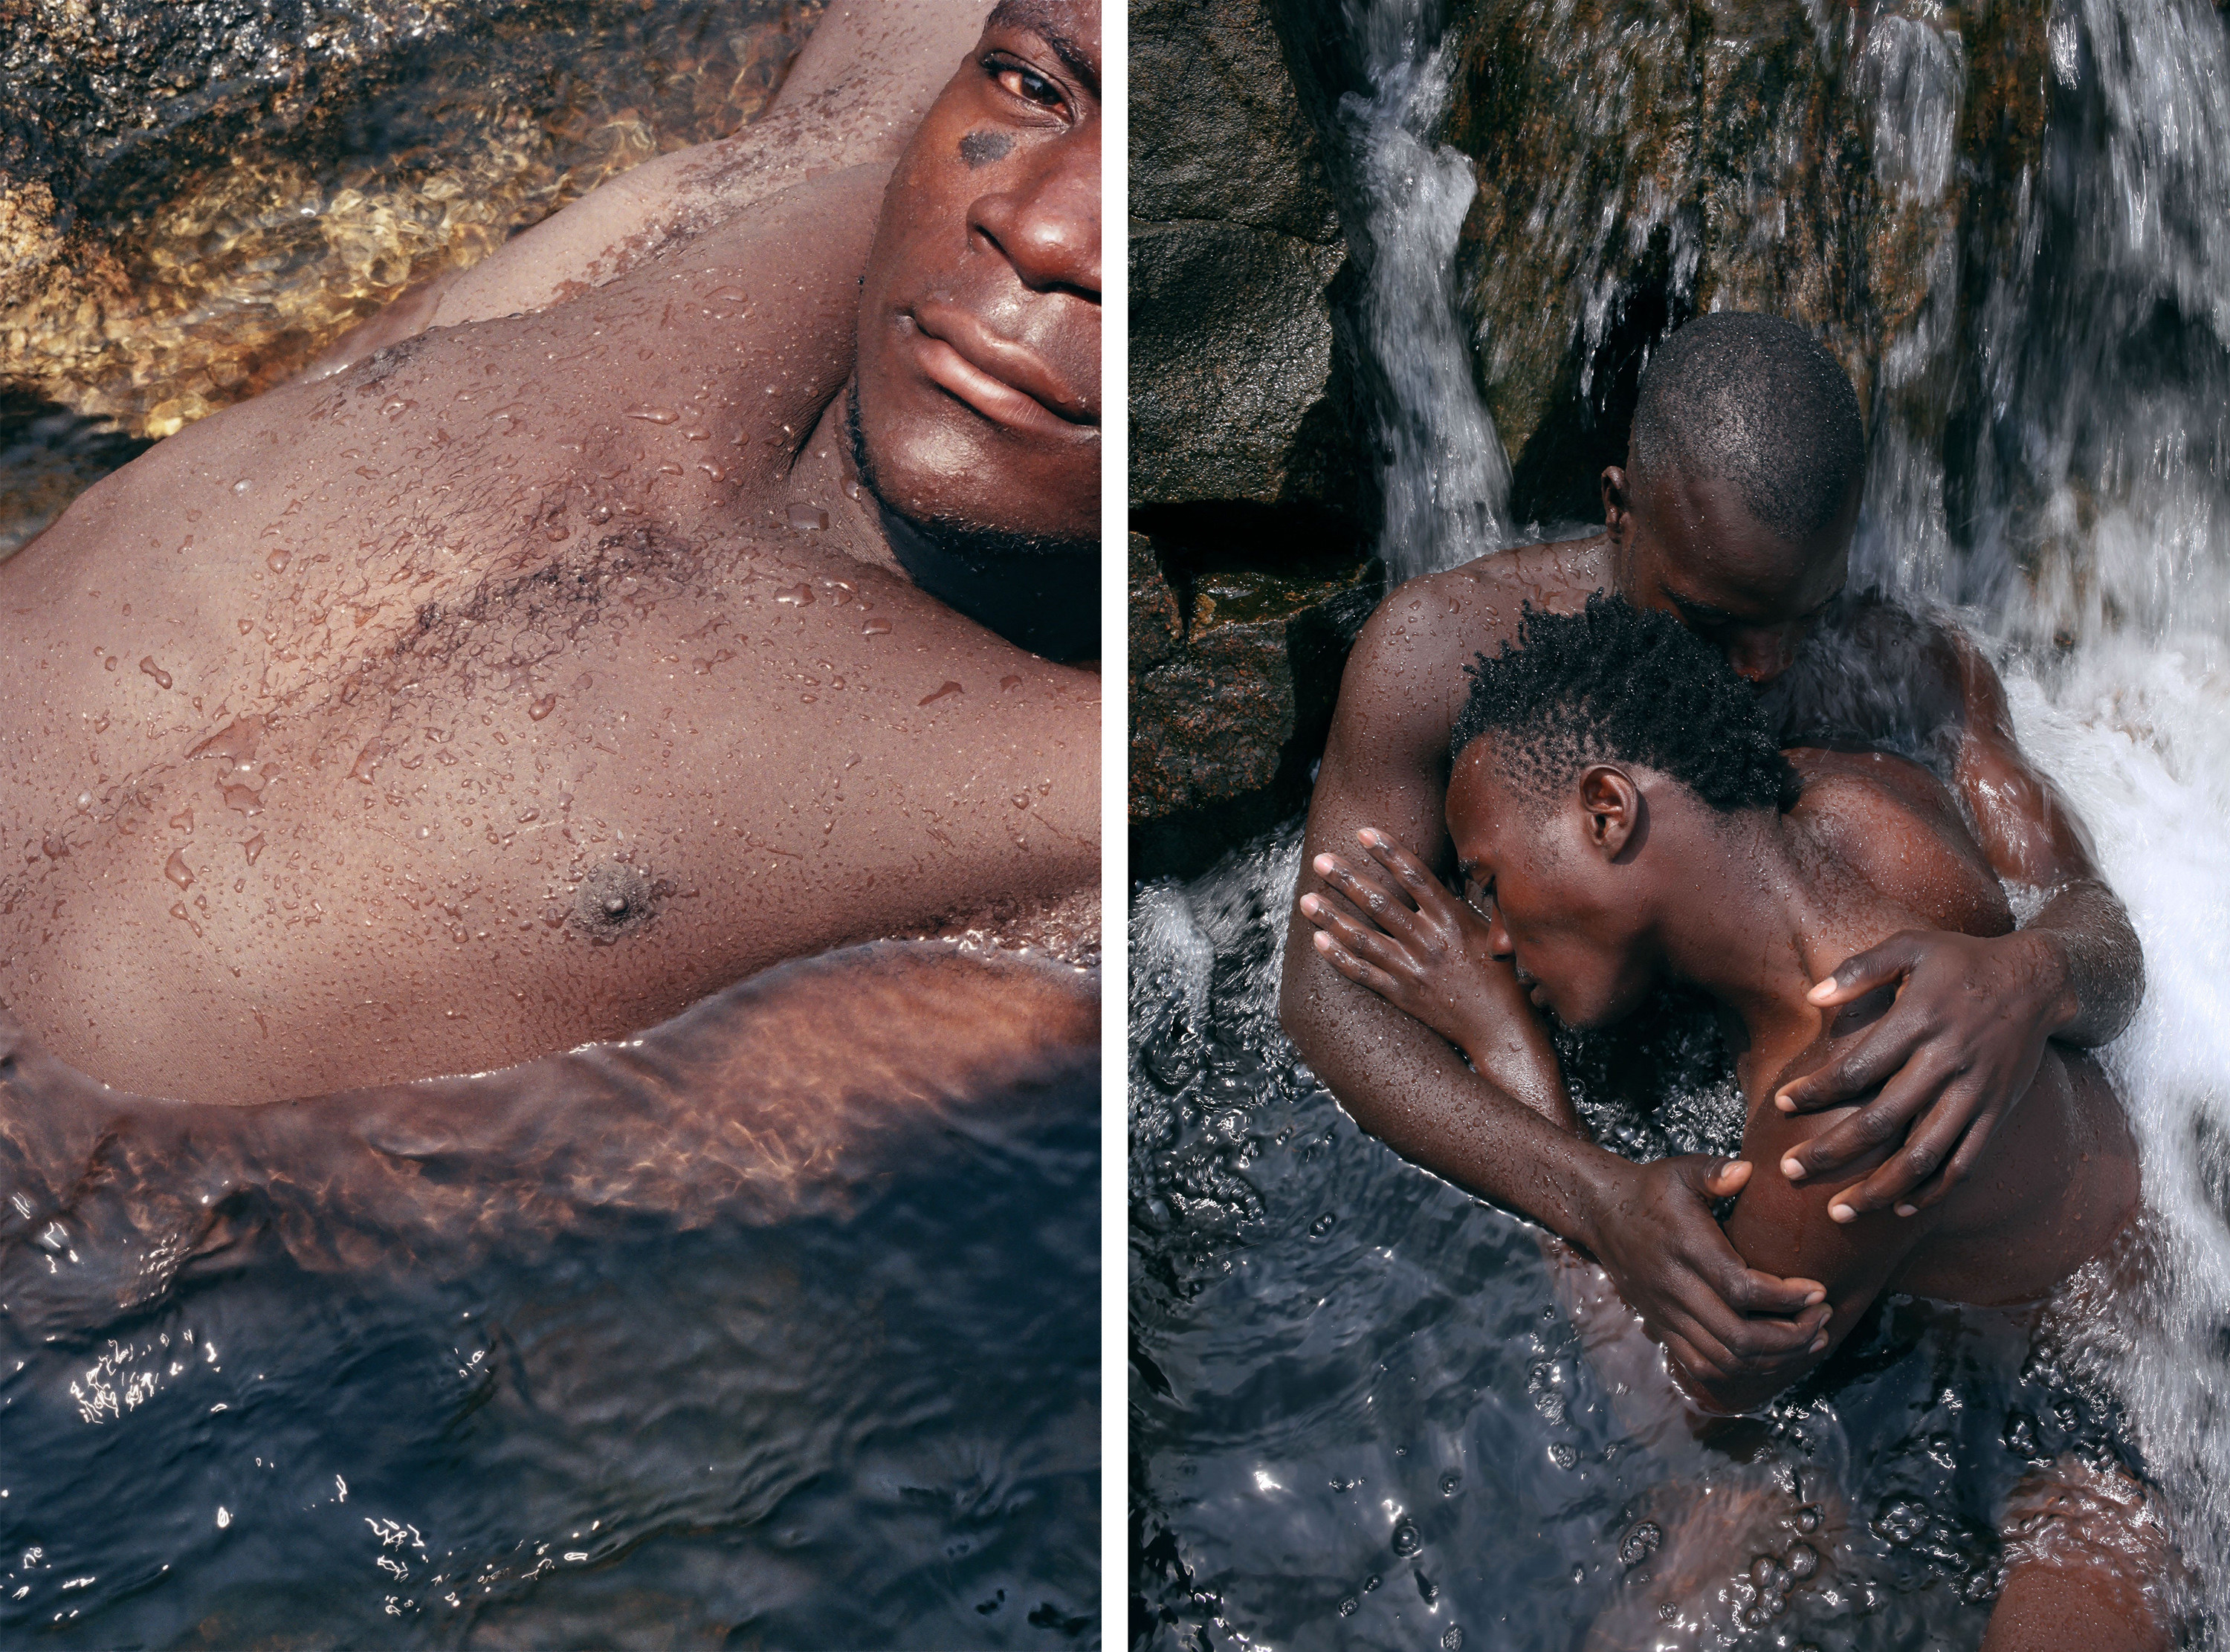 This Photo Exhibition Of Nudes Is From A Woman's Perspective